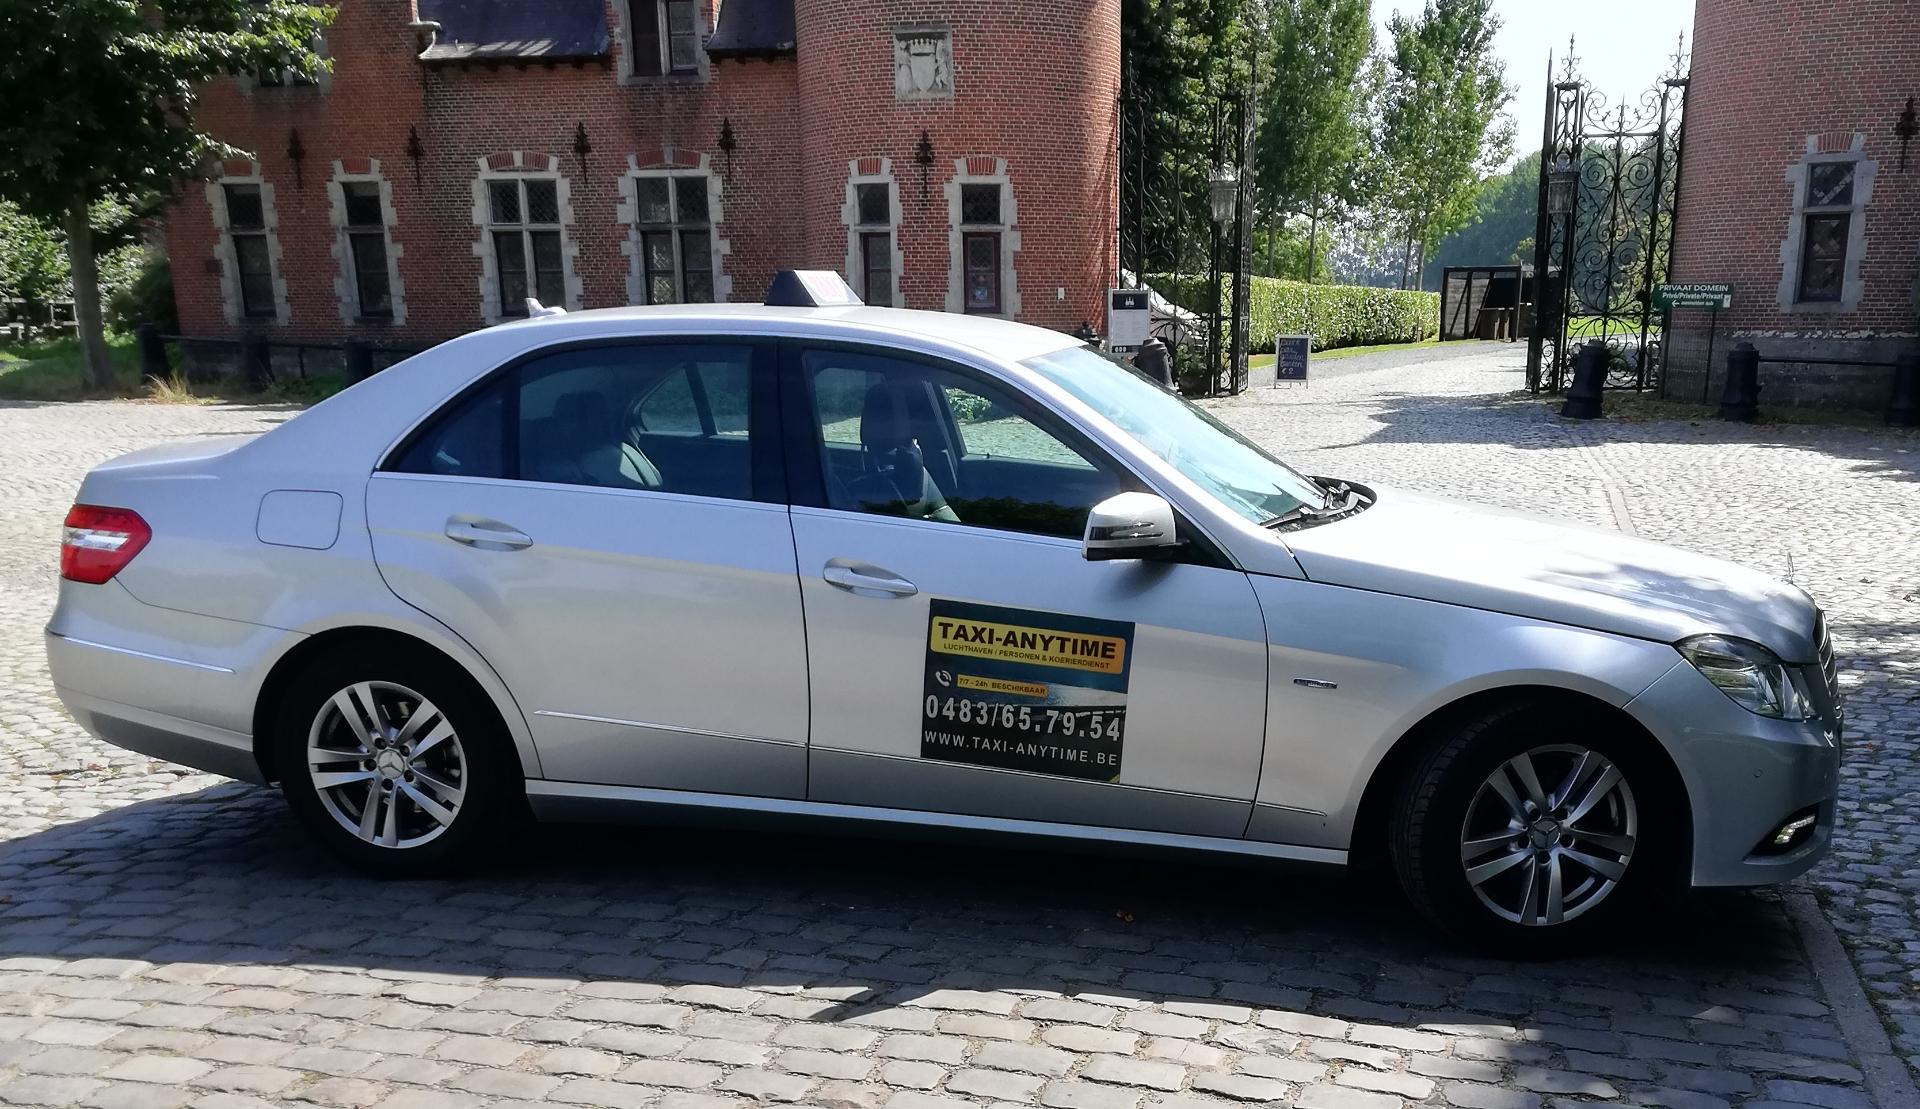 luxe-autoverhuurders Evere Taxi-Anytime